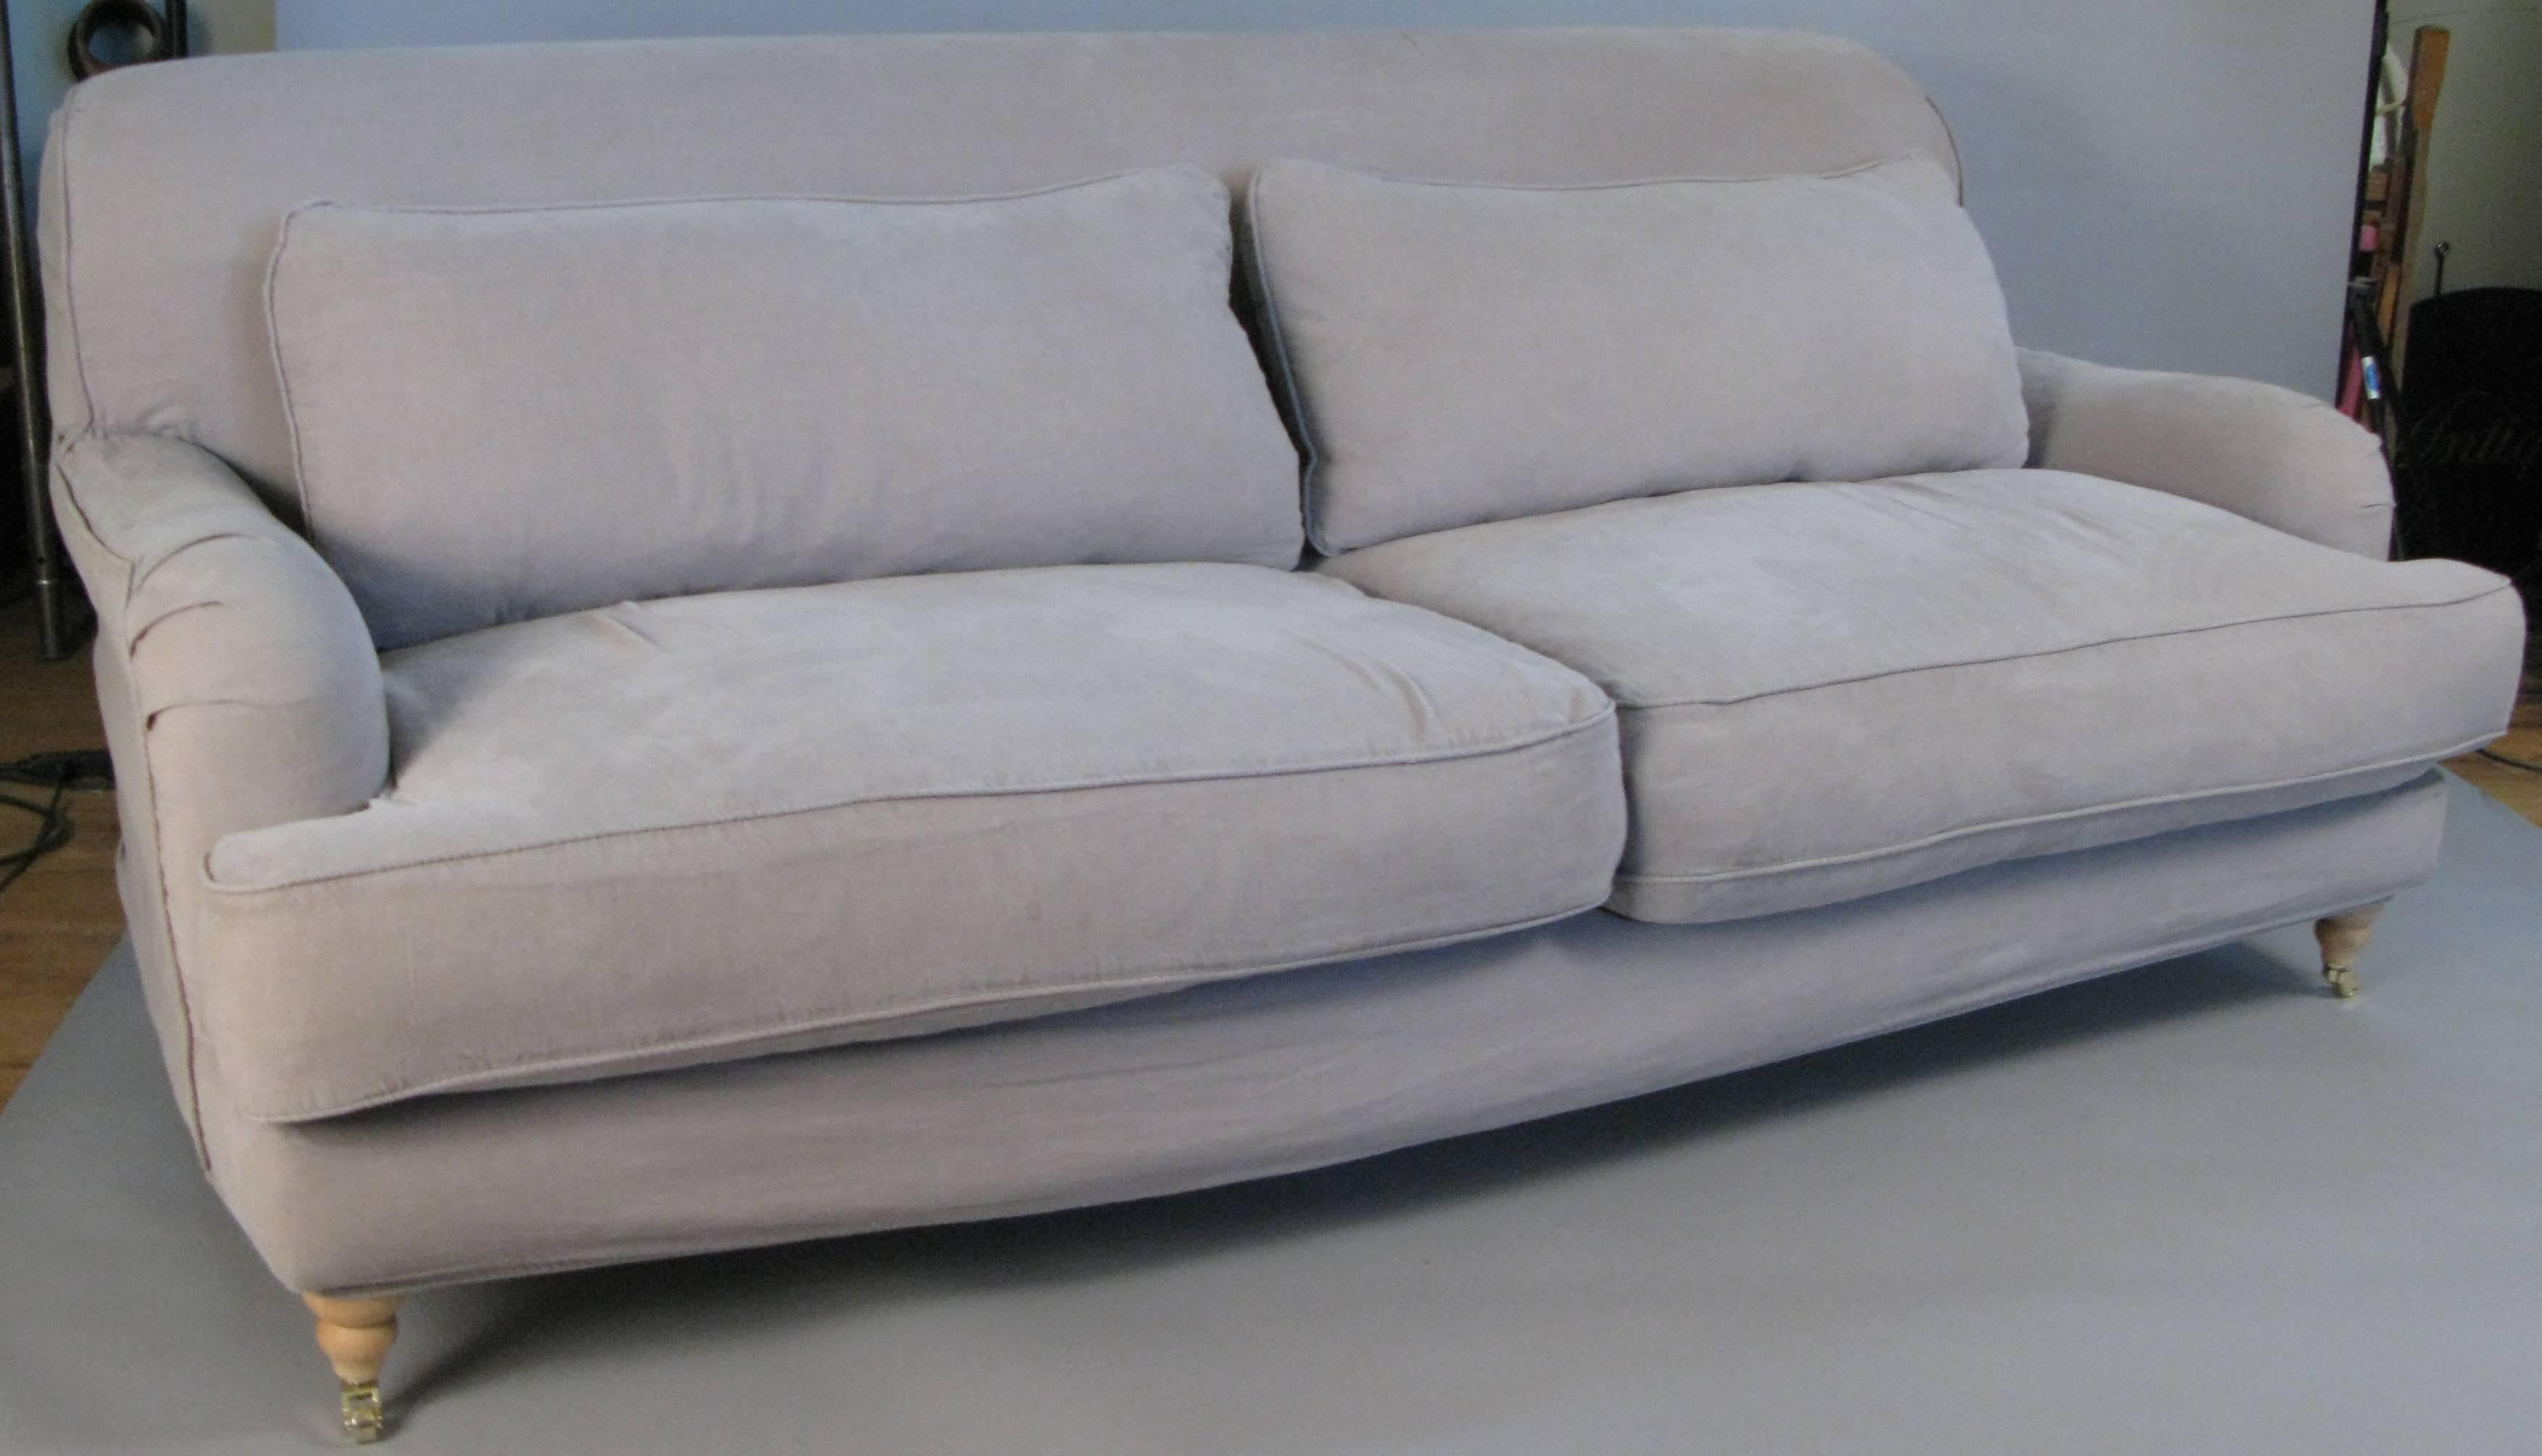 A very well made and stylish rolled arm Portobello sofa by Rachel Ashwell. The frame is upholstered in muslin, and includes two sets of slipcovers, one in grey linen, and the other set is in white denim. Cushions are down.